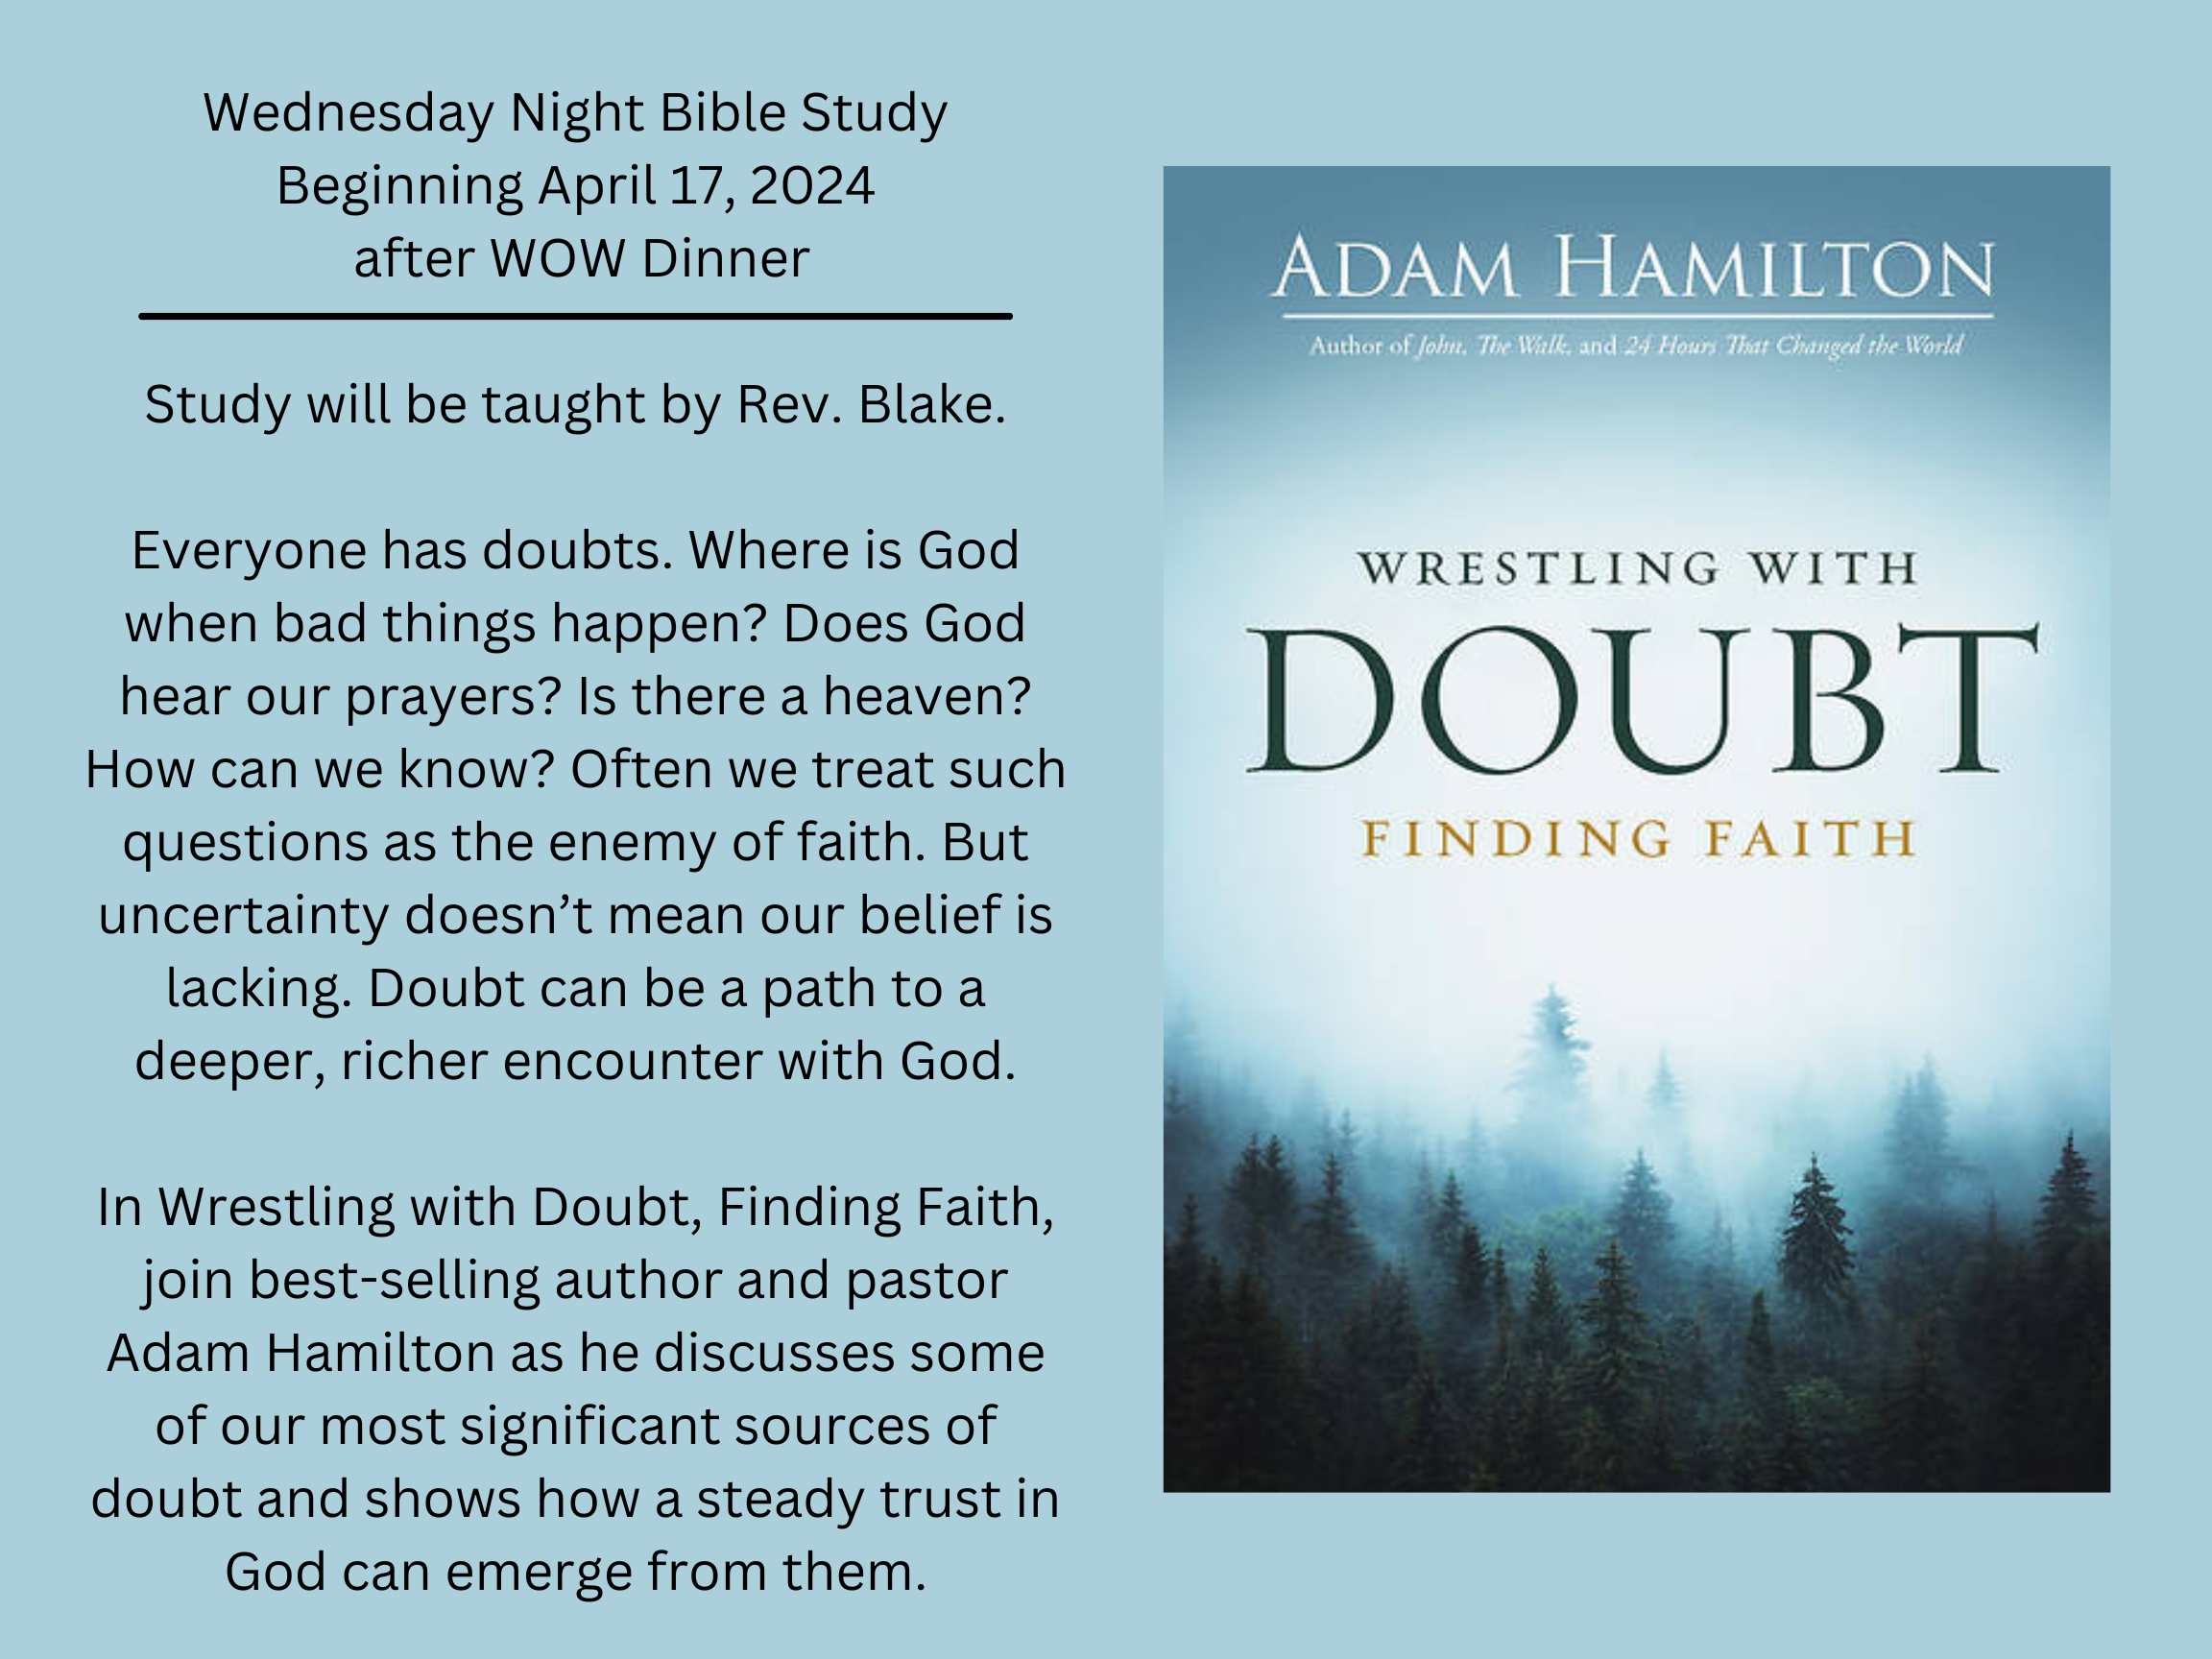 Wednesday Night Bible Study Starting April 17th, “Wrestling With Doubt”